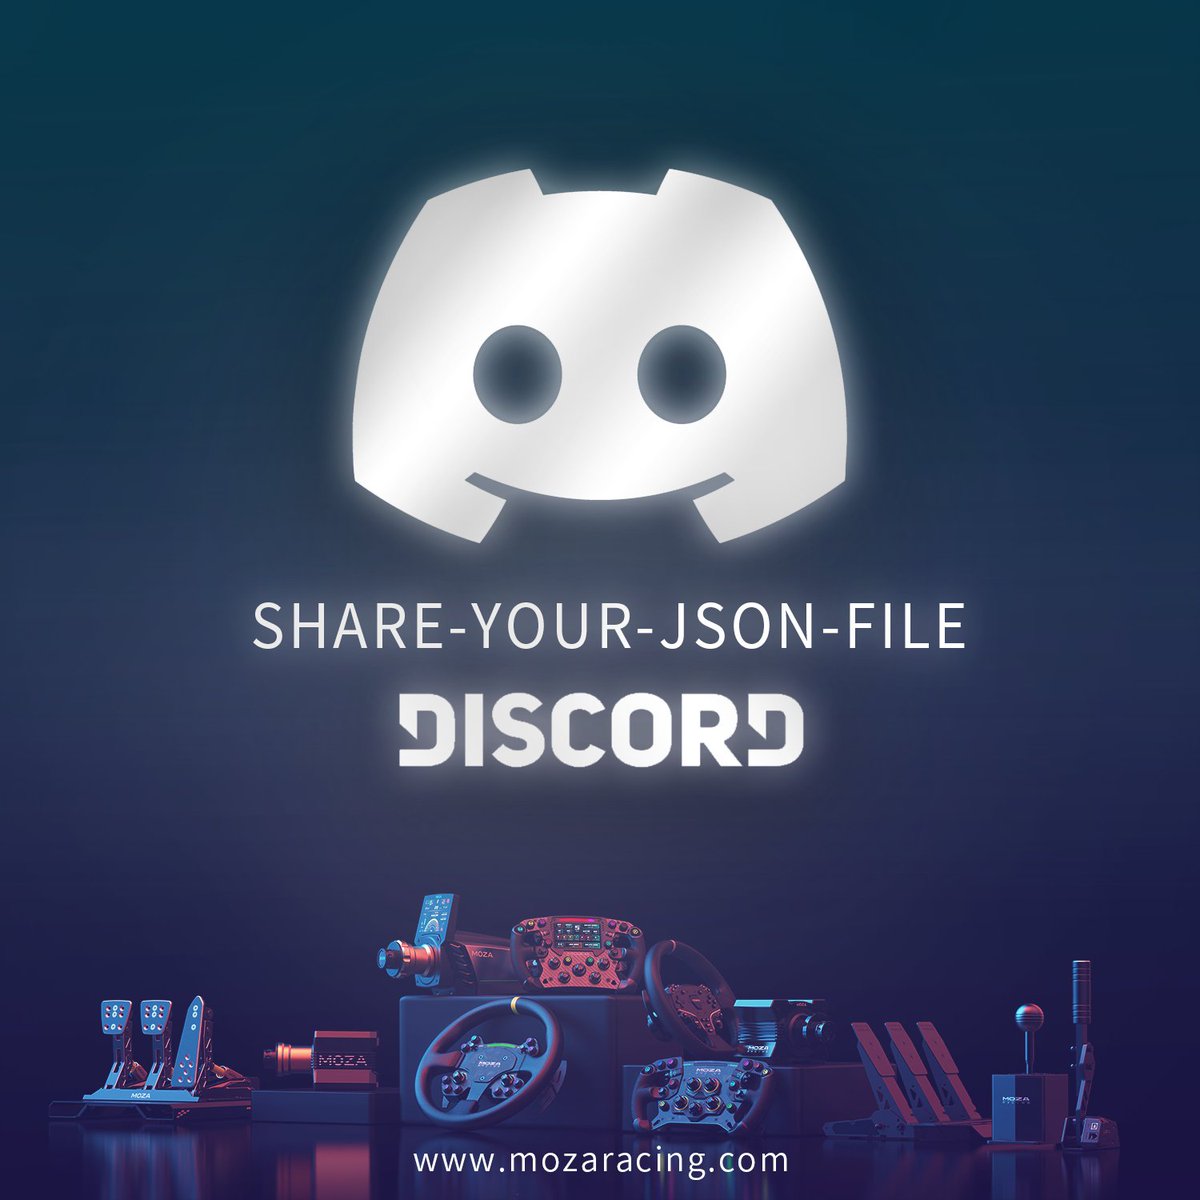 📢 Calling all MOZA Racing users! 

We've just launched a dedicated JSON file sharing forum on our Discord server. Join our Discord community and share your recommended MOZA settings or try others'! 

Your input can make a huge difference! 

discord.gg/CCBgHxJAdX